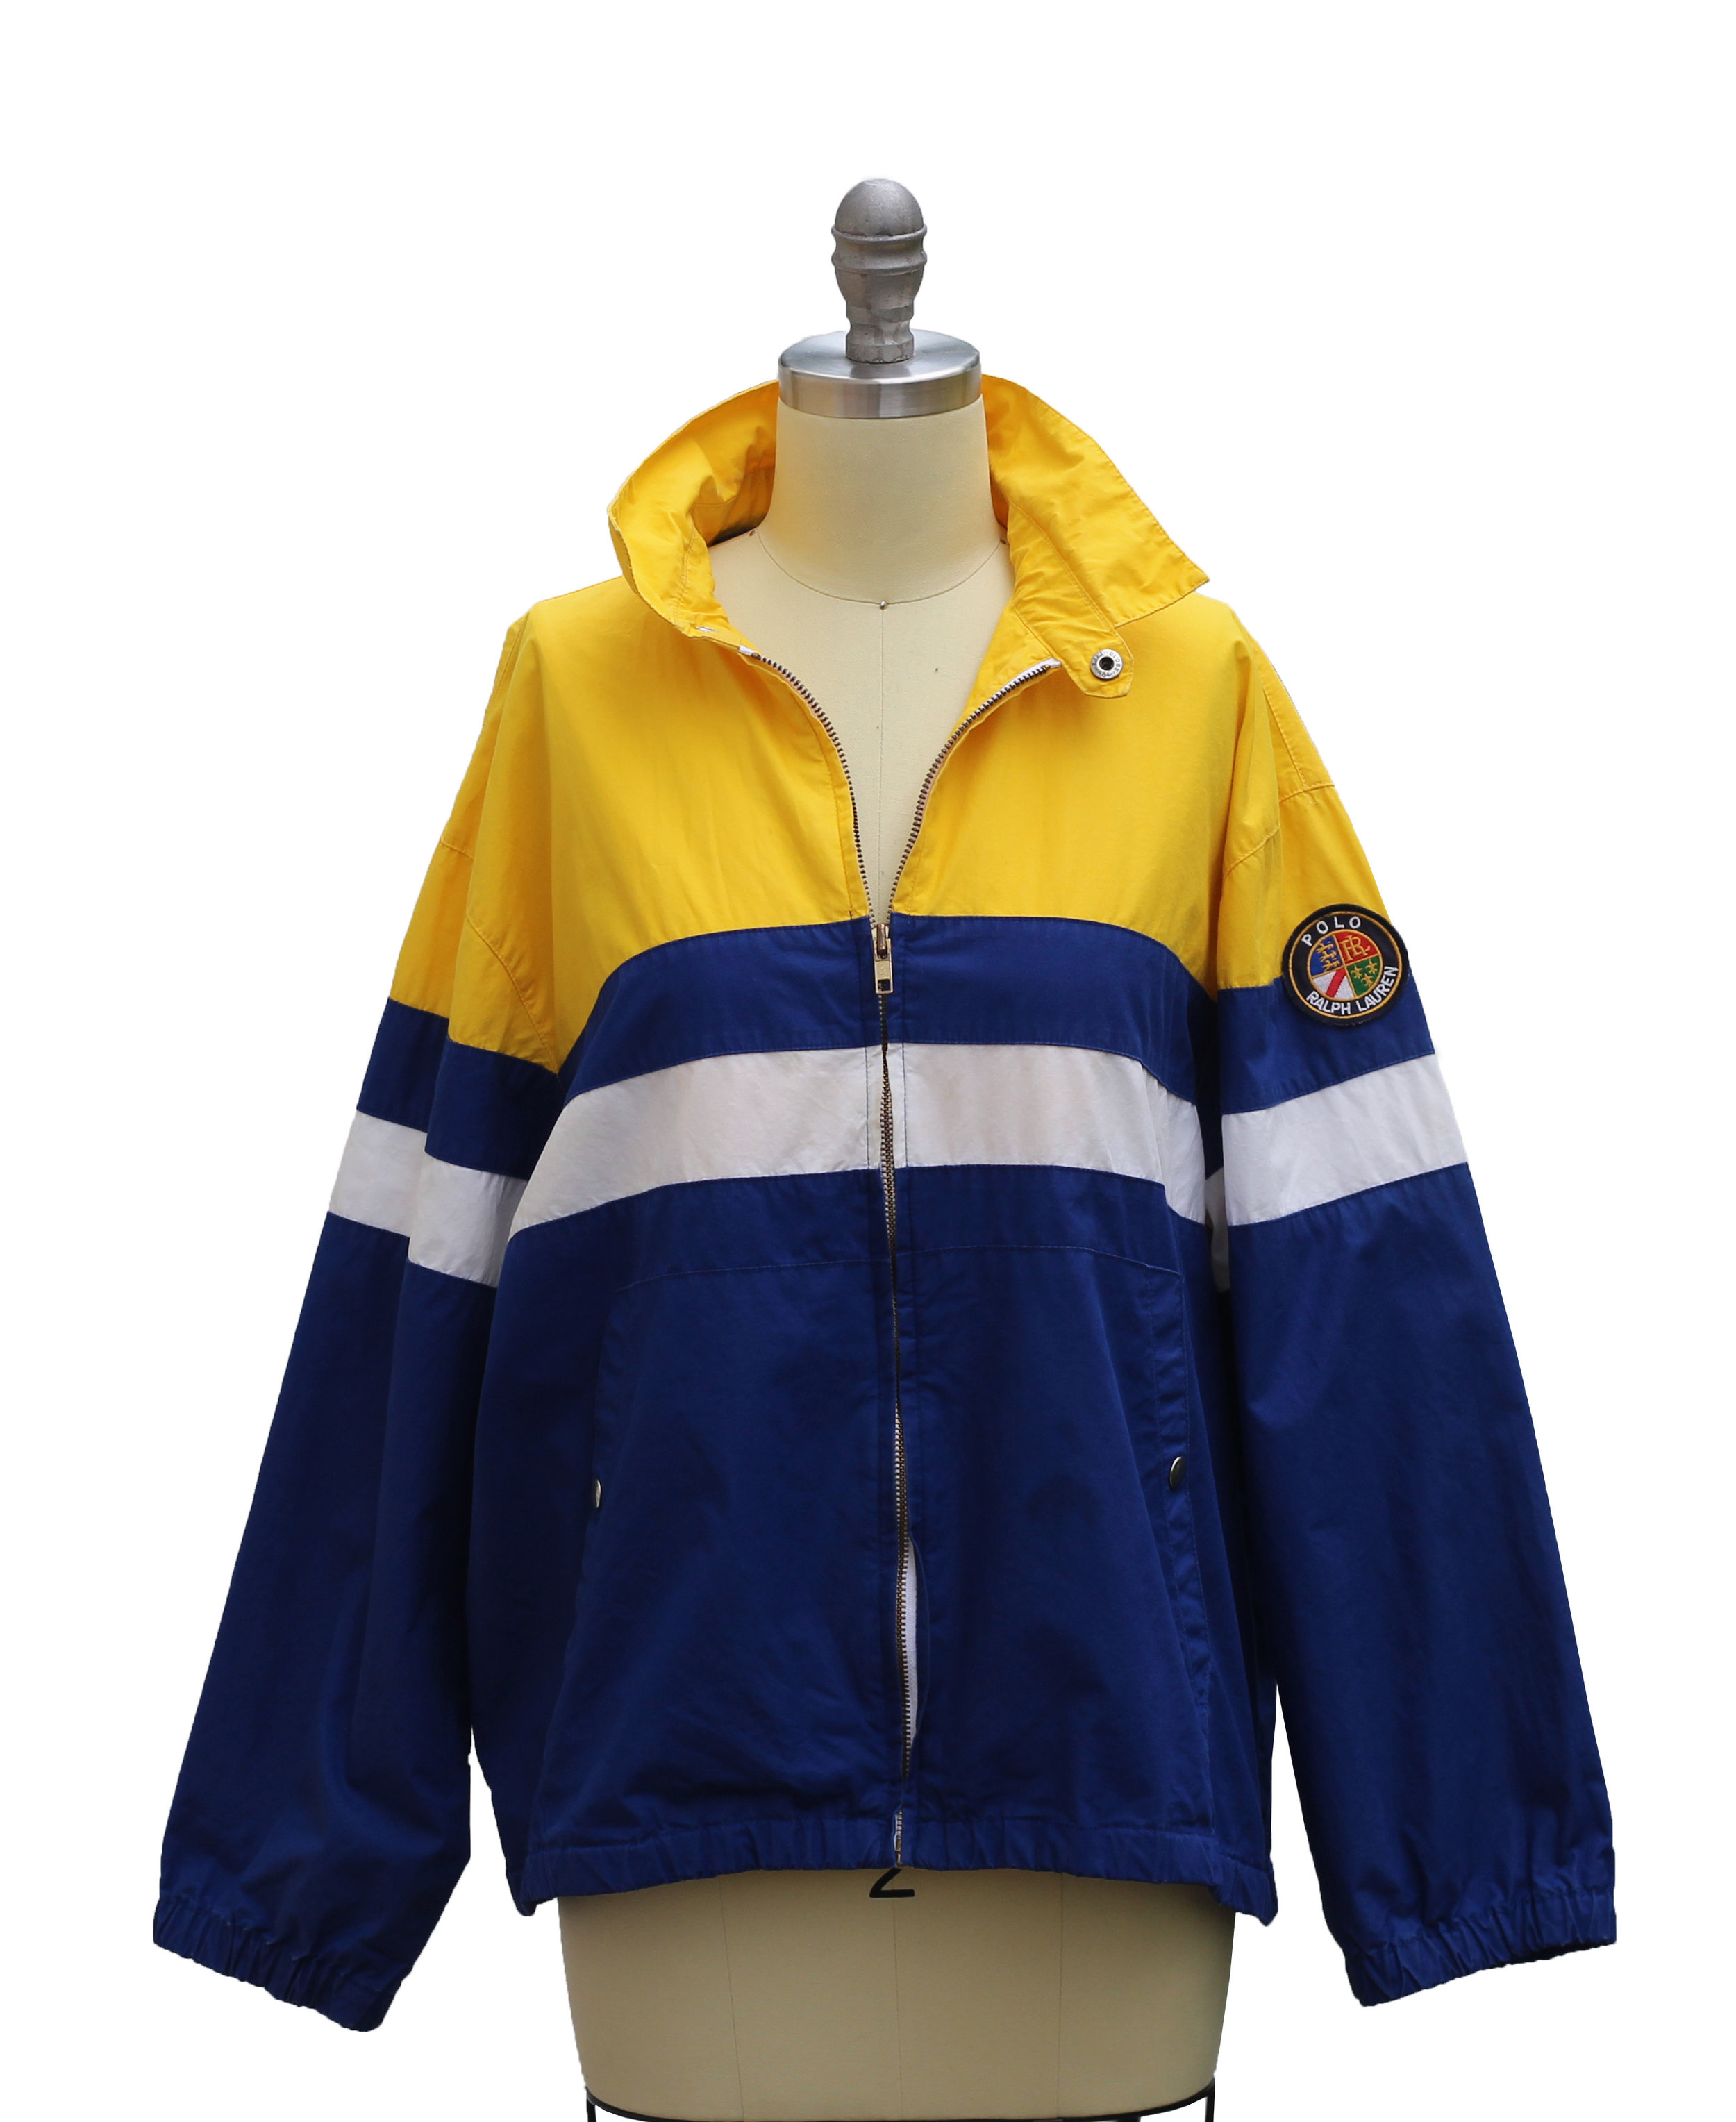 blue and yellow polo jacket